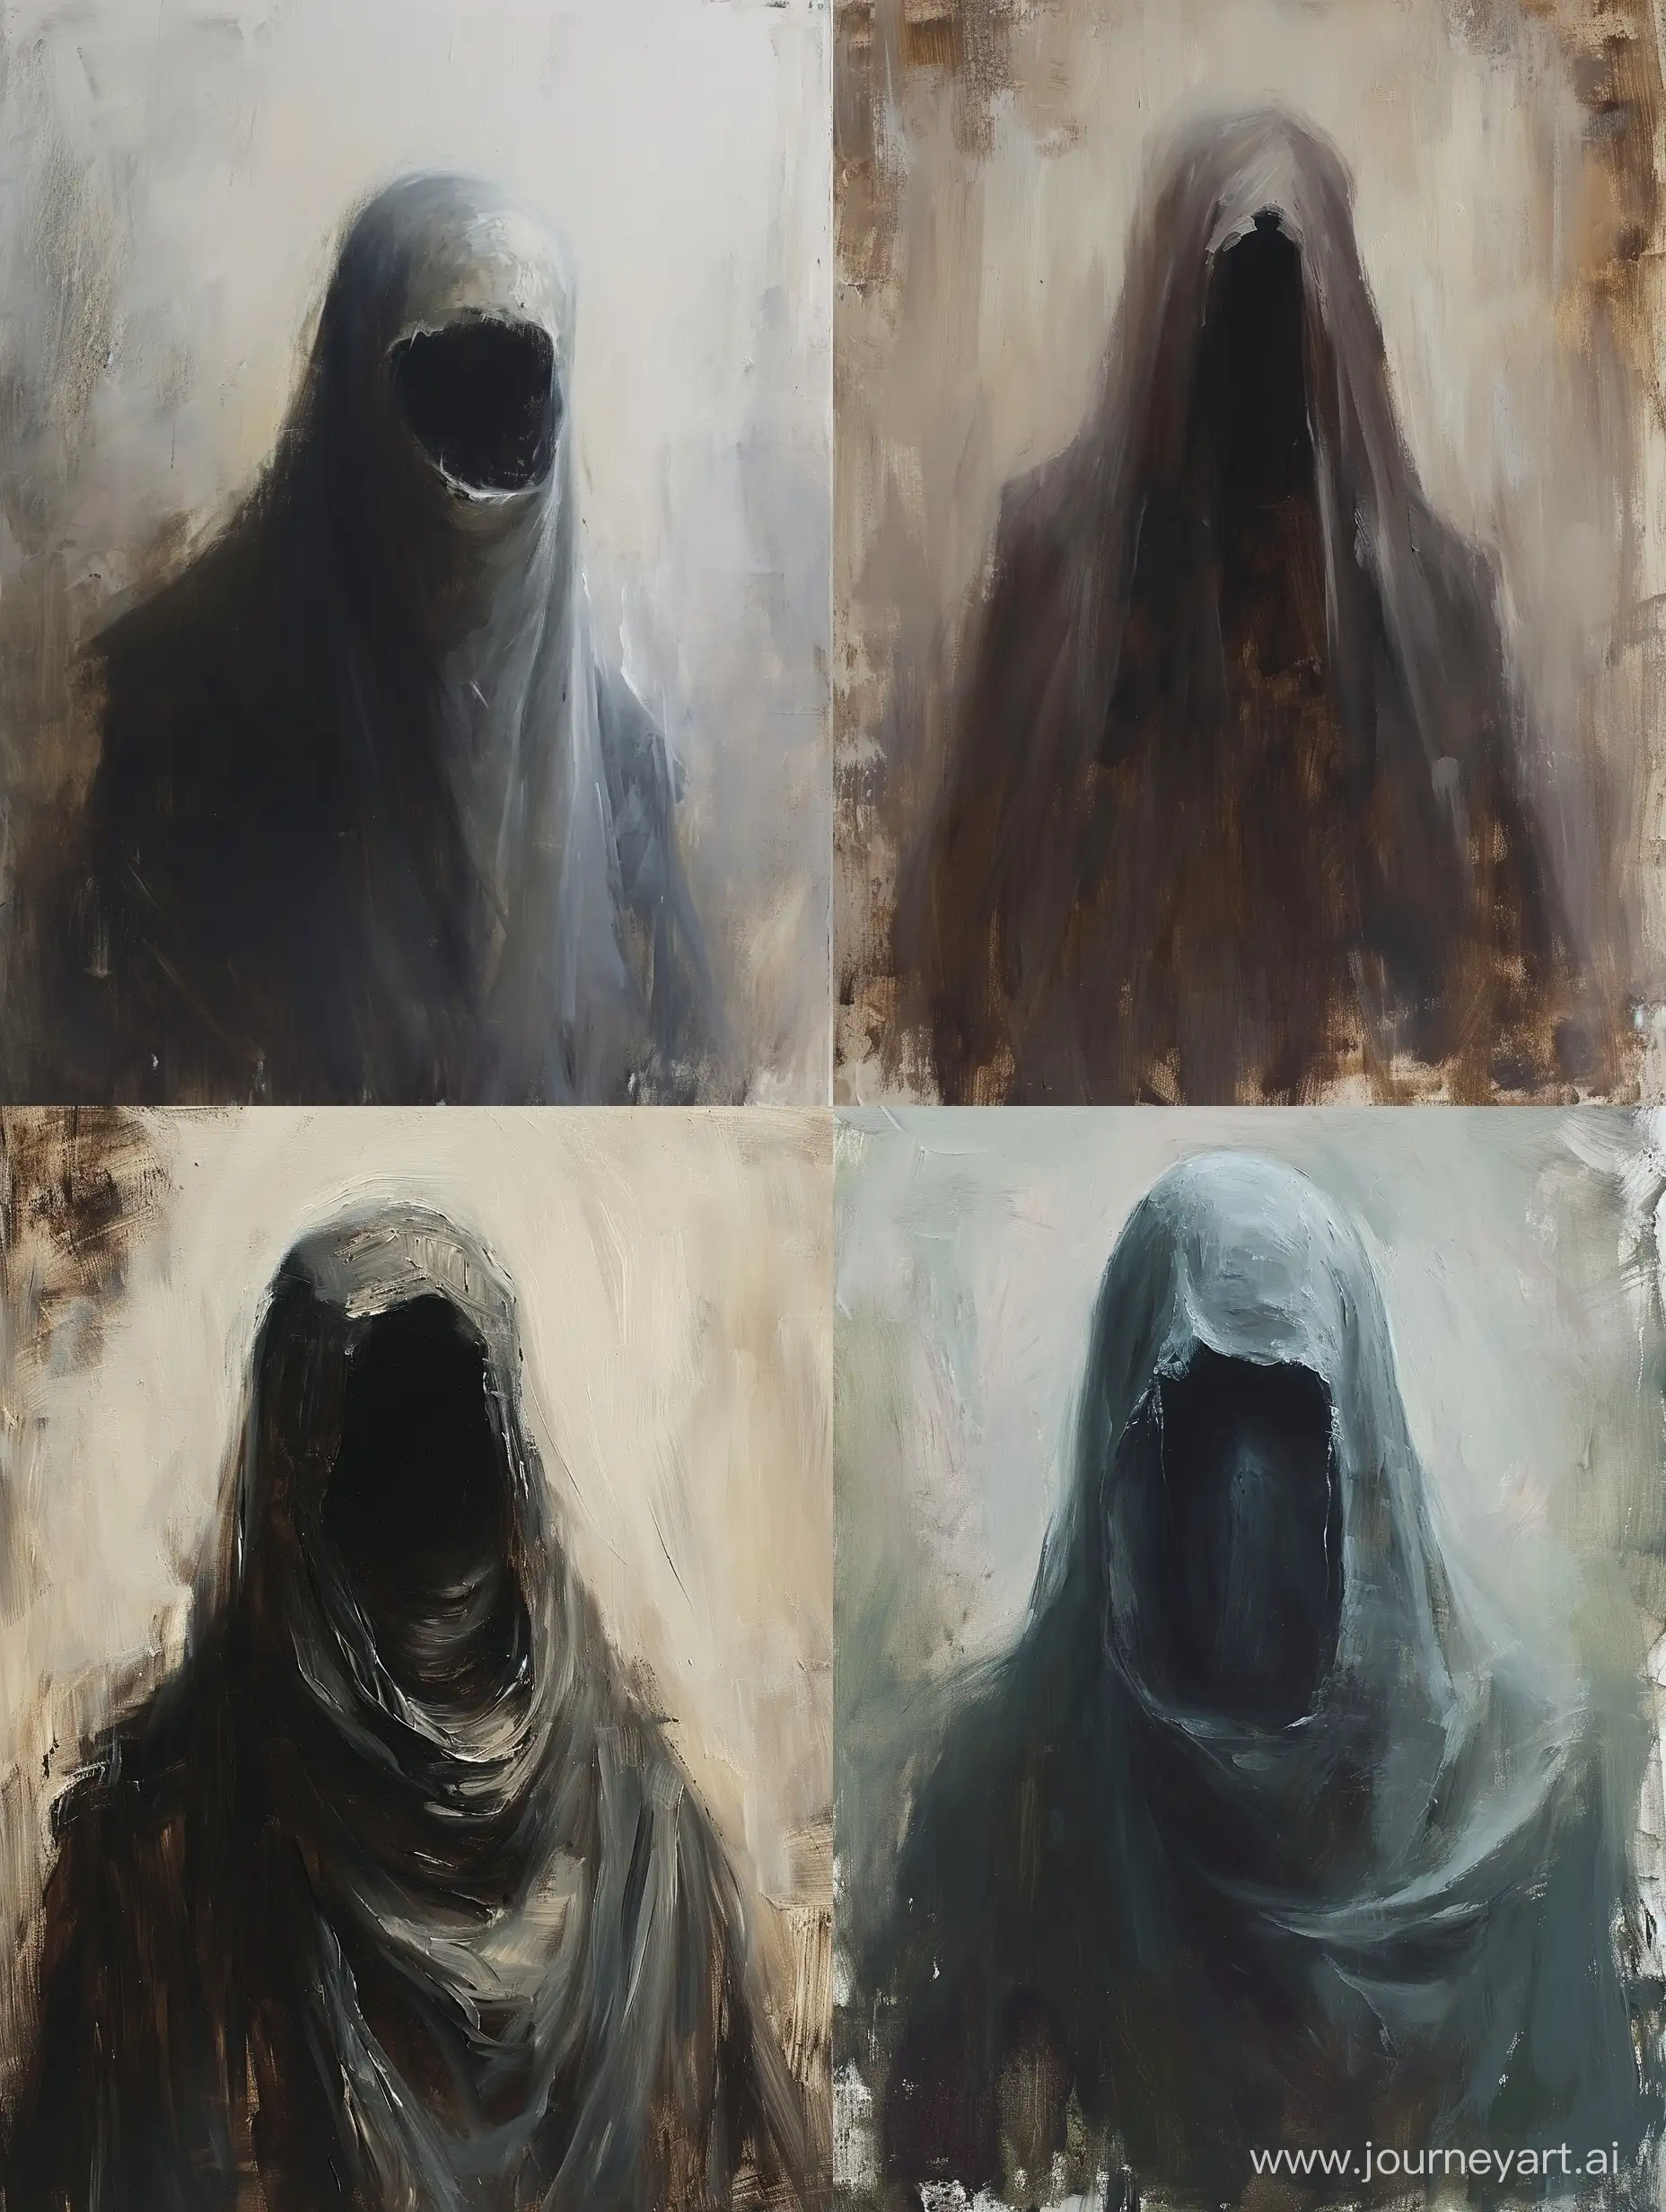 /imagine prompt: A haunting portrait of a ghost, covered with a dark cloak that leaves its mouth uncovered, looking straight ahead, painted in a realistic oil painting style. The atmosphere is eerie and supernatural, with the brushstrokes emphasizing the ghostly and otherworldly quality of the figure. The painting has a high quality, with intricate details in the cloak and the ghost's face. The ghost is shown in a close-up, with its face partially covered by the cloak and its mouth exposed. The colors are pale and ethereal, with a high contrast that adds to the ghostly atmosphere of the painting. The background is blurred, with a soft focus that emphasizes the focus on the ghost and its supernatural appearance. The composition is simple, with the focus on the ghost's ghostly and otherworldly quality. The painting has a realistic quality that allows for every detail to be seen clearly, making it feel like a real portrayal of a ghost. It's a perfect fit for those who appreciate the eerie and supernatural quality of realistic oil paintings. --ar 3:4
